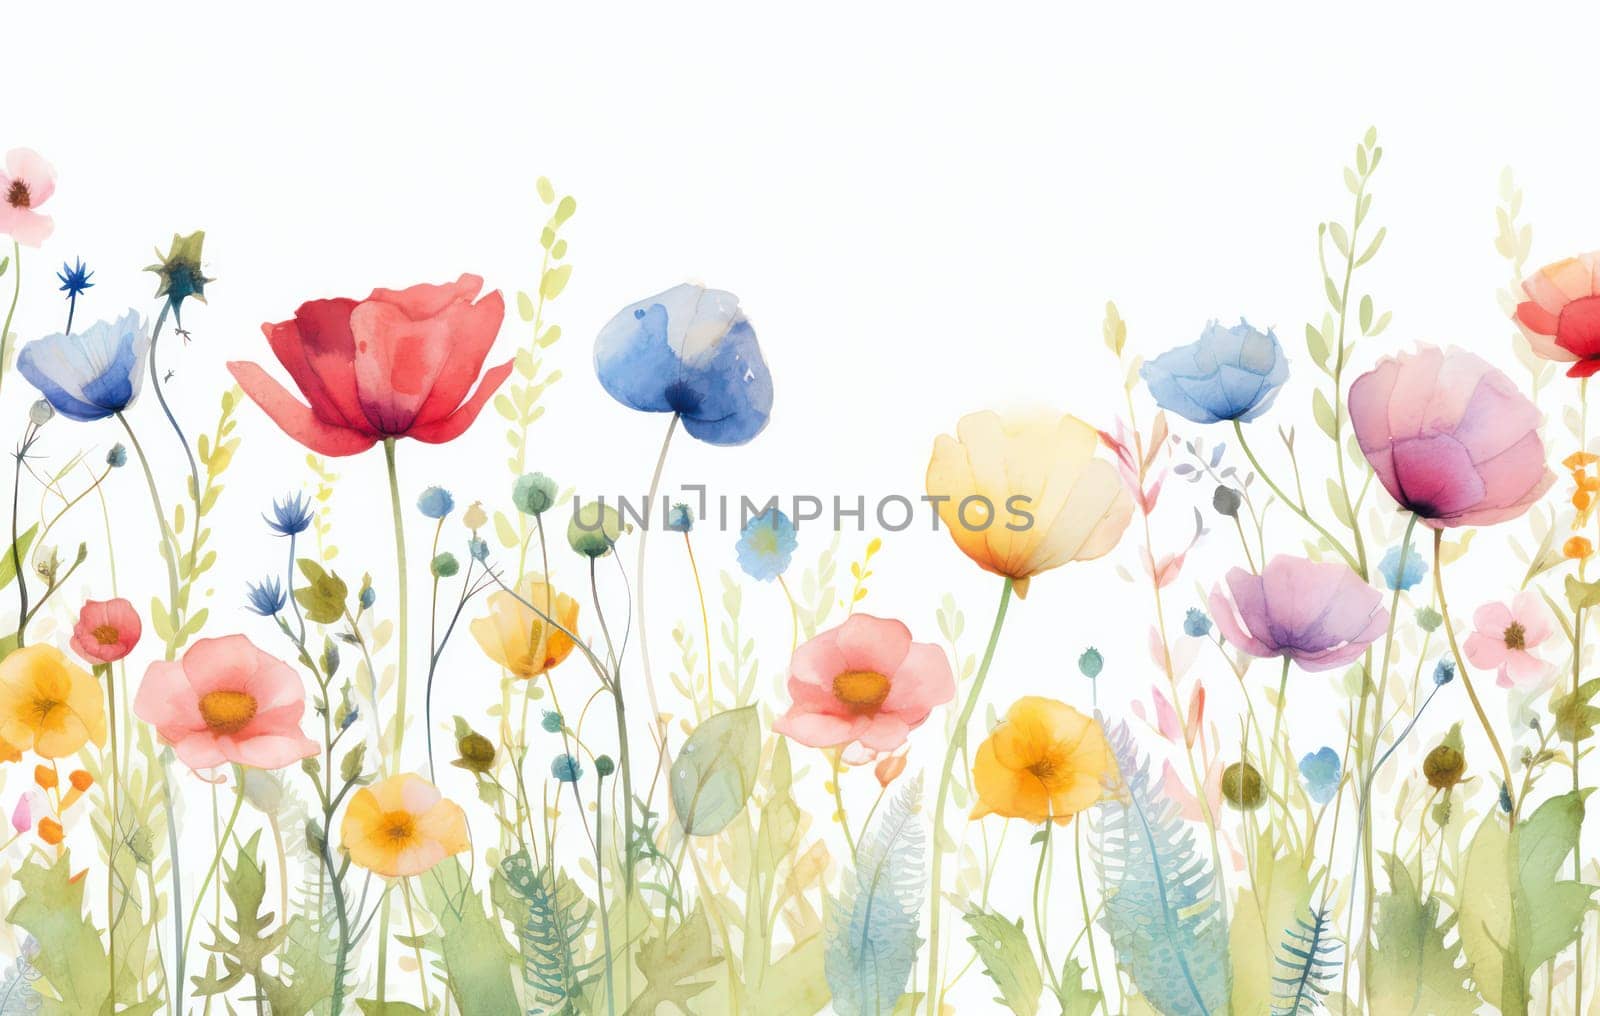 Nature's Spring Symphony: A Red Poppy Blossom - Watercolor Floral Illustration on Vintage Retro Background